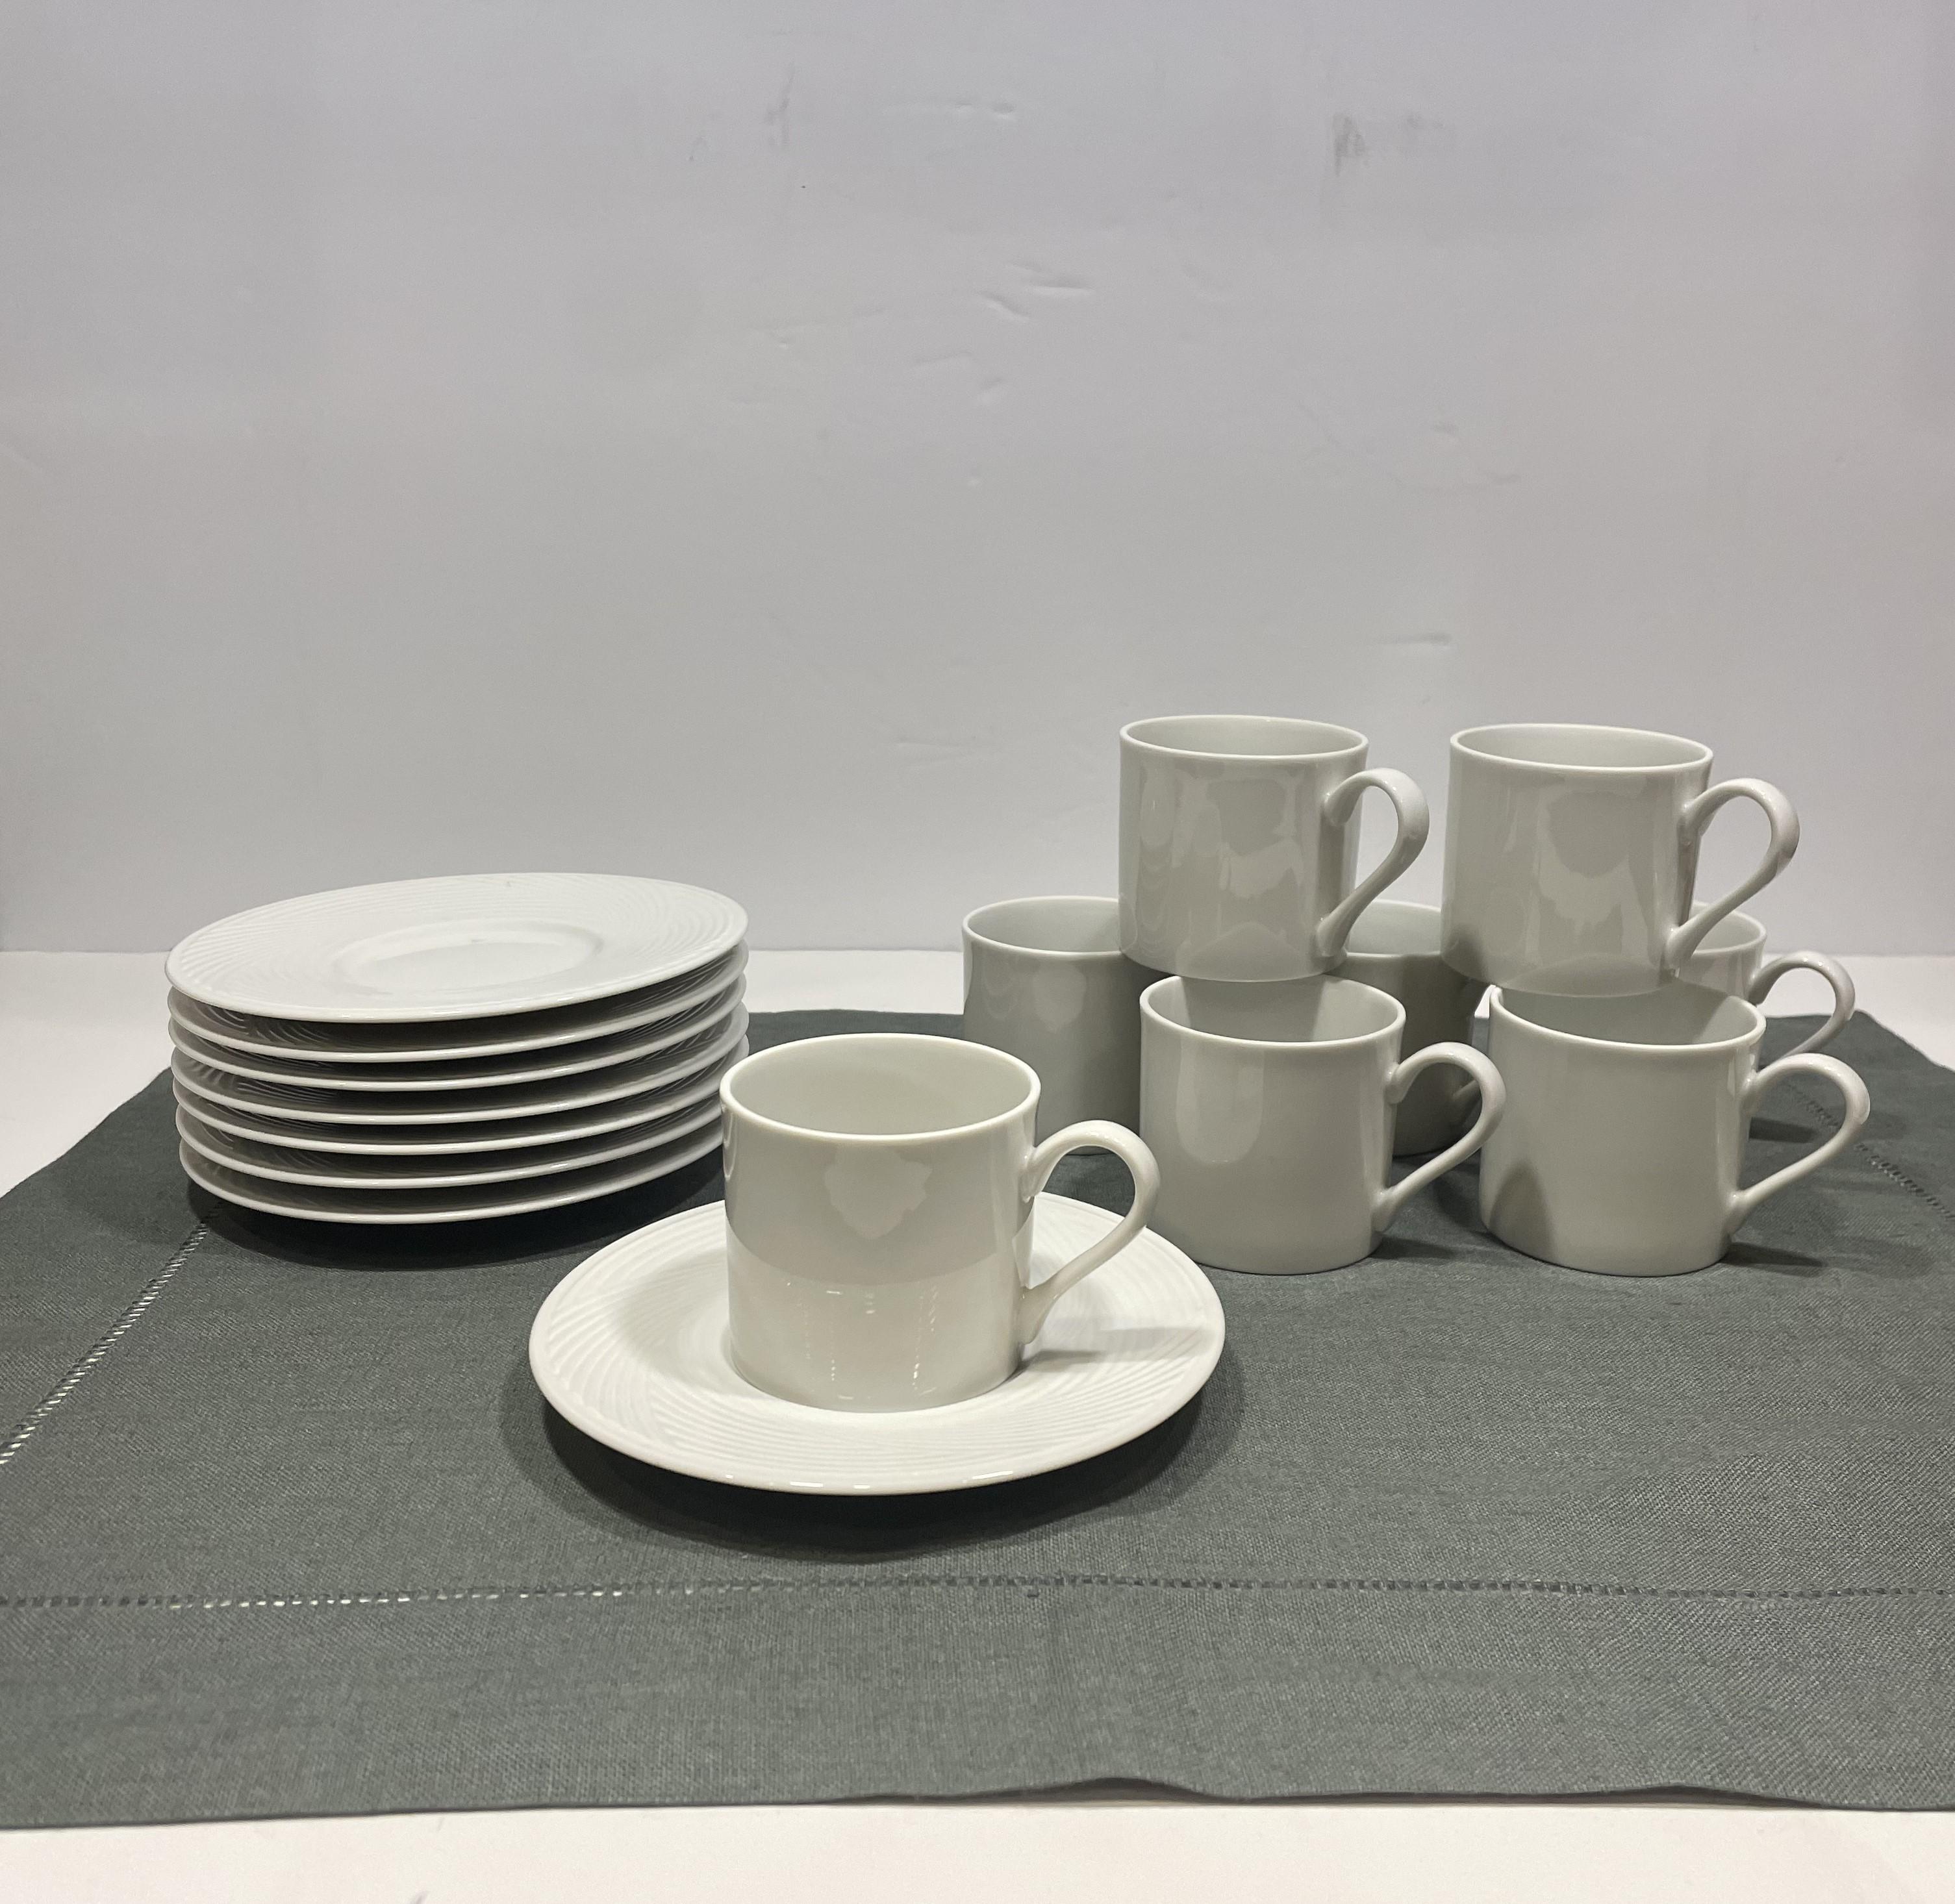 I love this classic set of 8 white porcelain demitasse cups and matching saucers from Dansk, the iconic MCM tableware company. This set was designed for the House of Dansk by Jack Lenor Larsen, the trailblazer in American post-war modernism. They